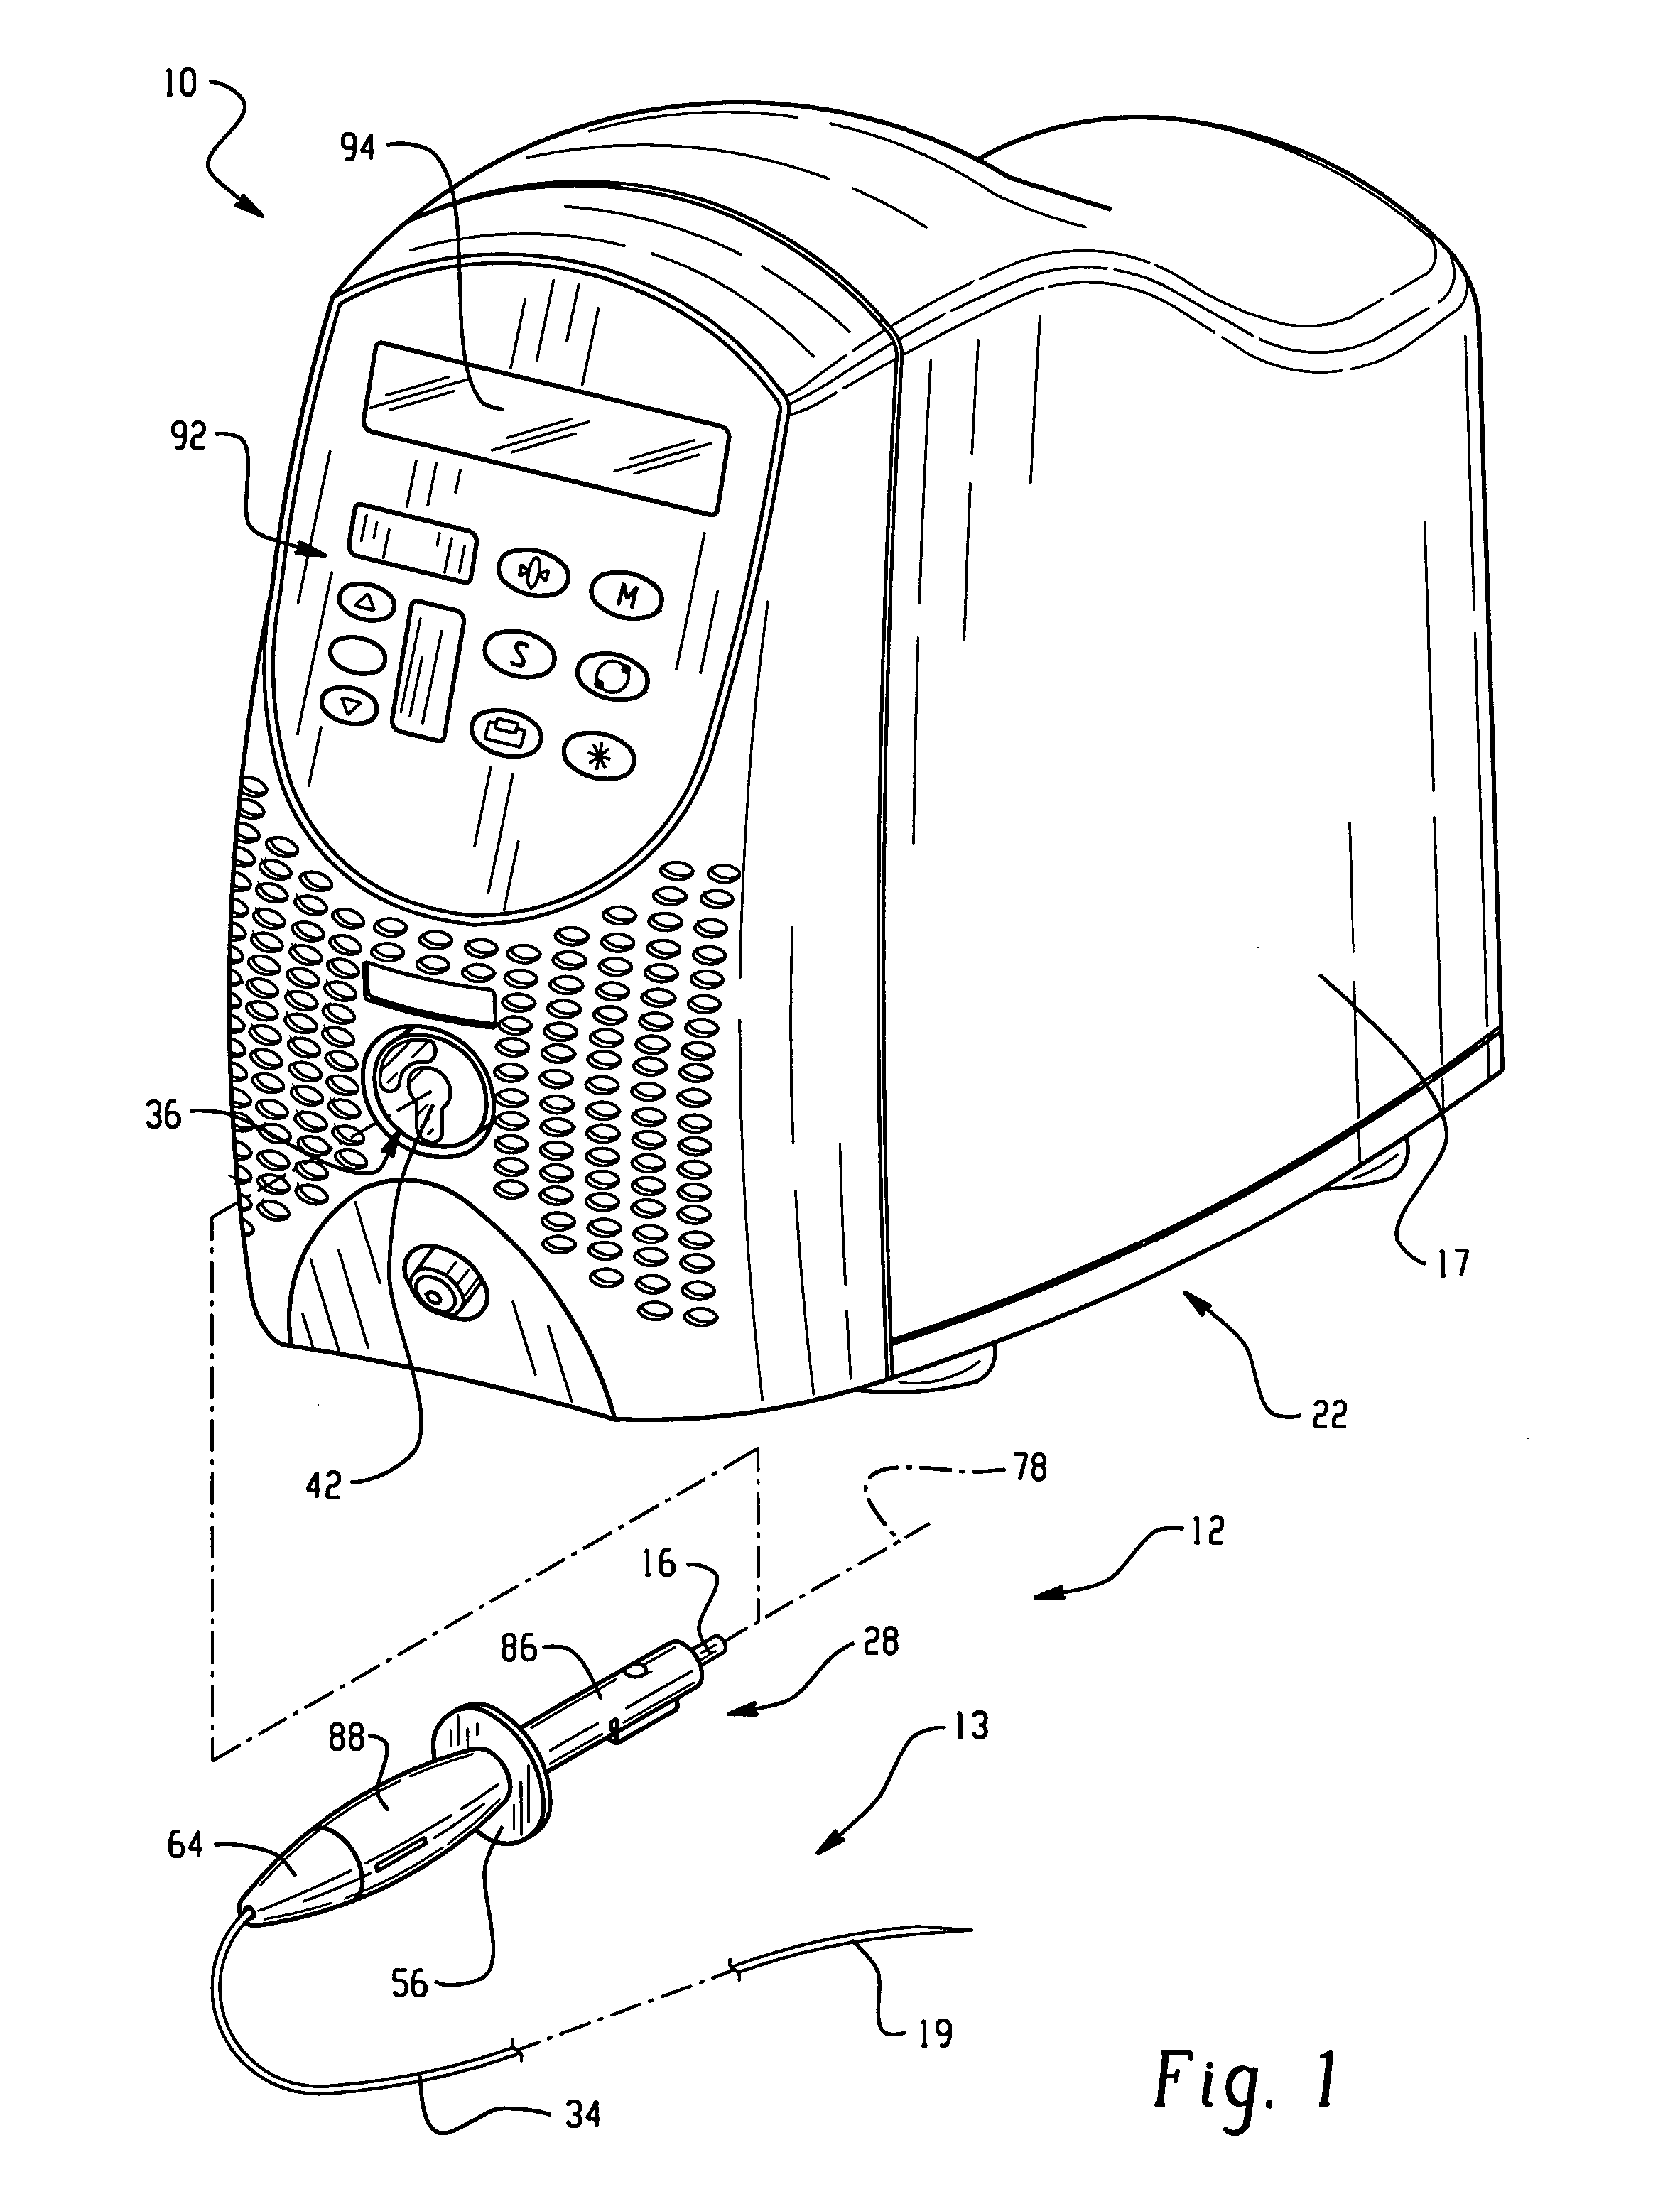 Energy delivery device with self-heat calibration